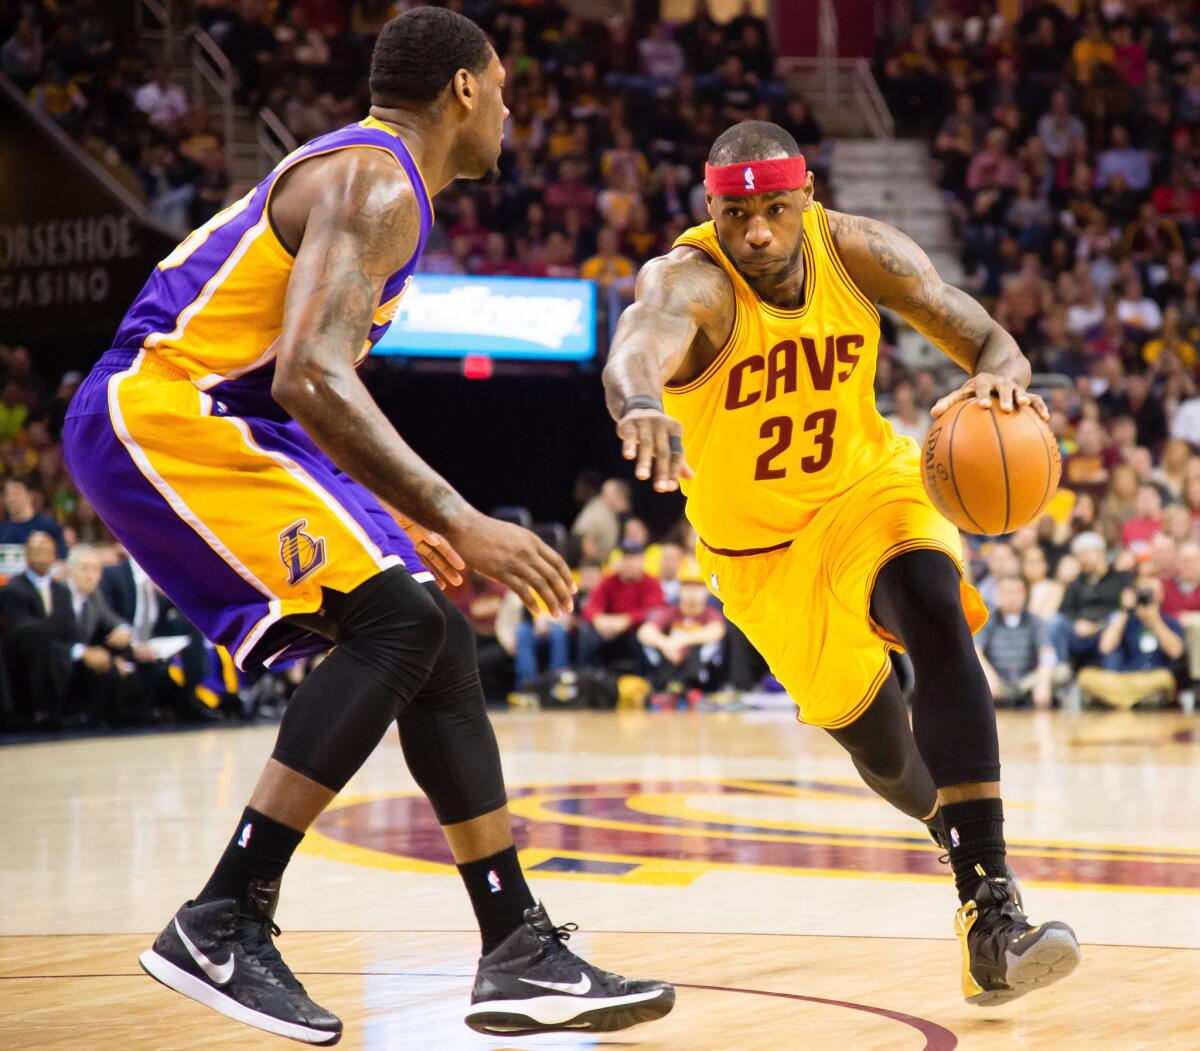 Cavaliers forward LeBron James (23) looks to drive against Lakers center Tarik Black in the first half.